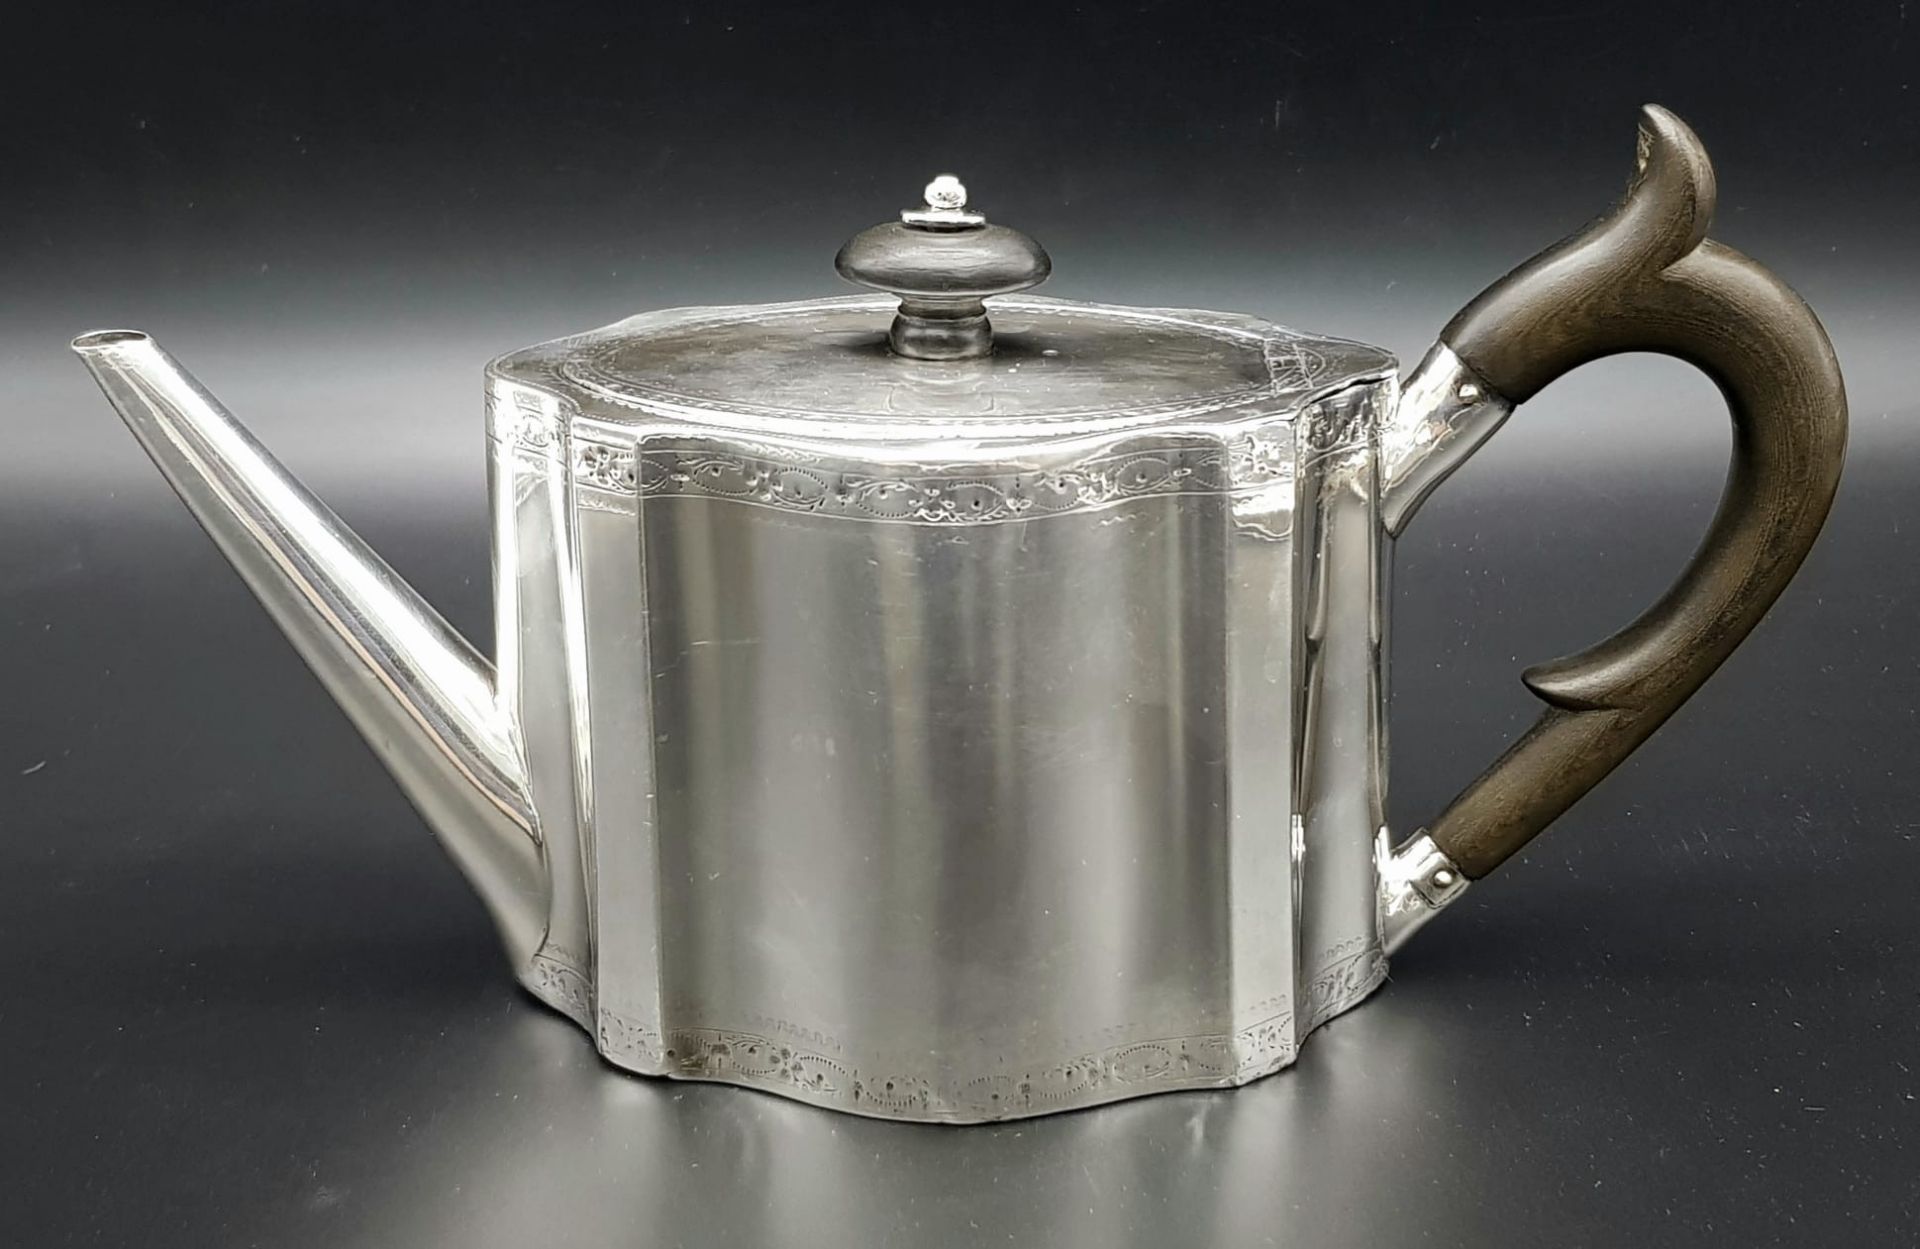 A 1785 Hester Bateman George III Silver Teapot. Oval form with empty cartouche to side. Minimalist